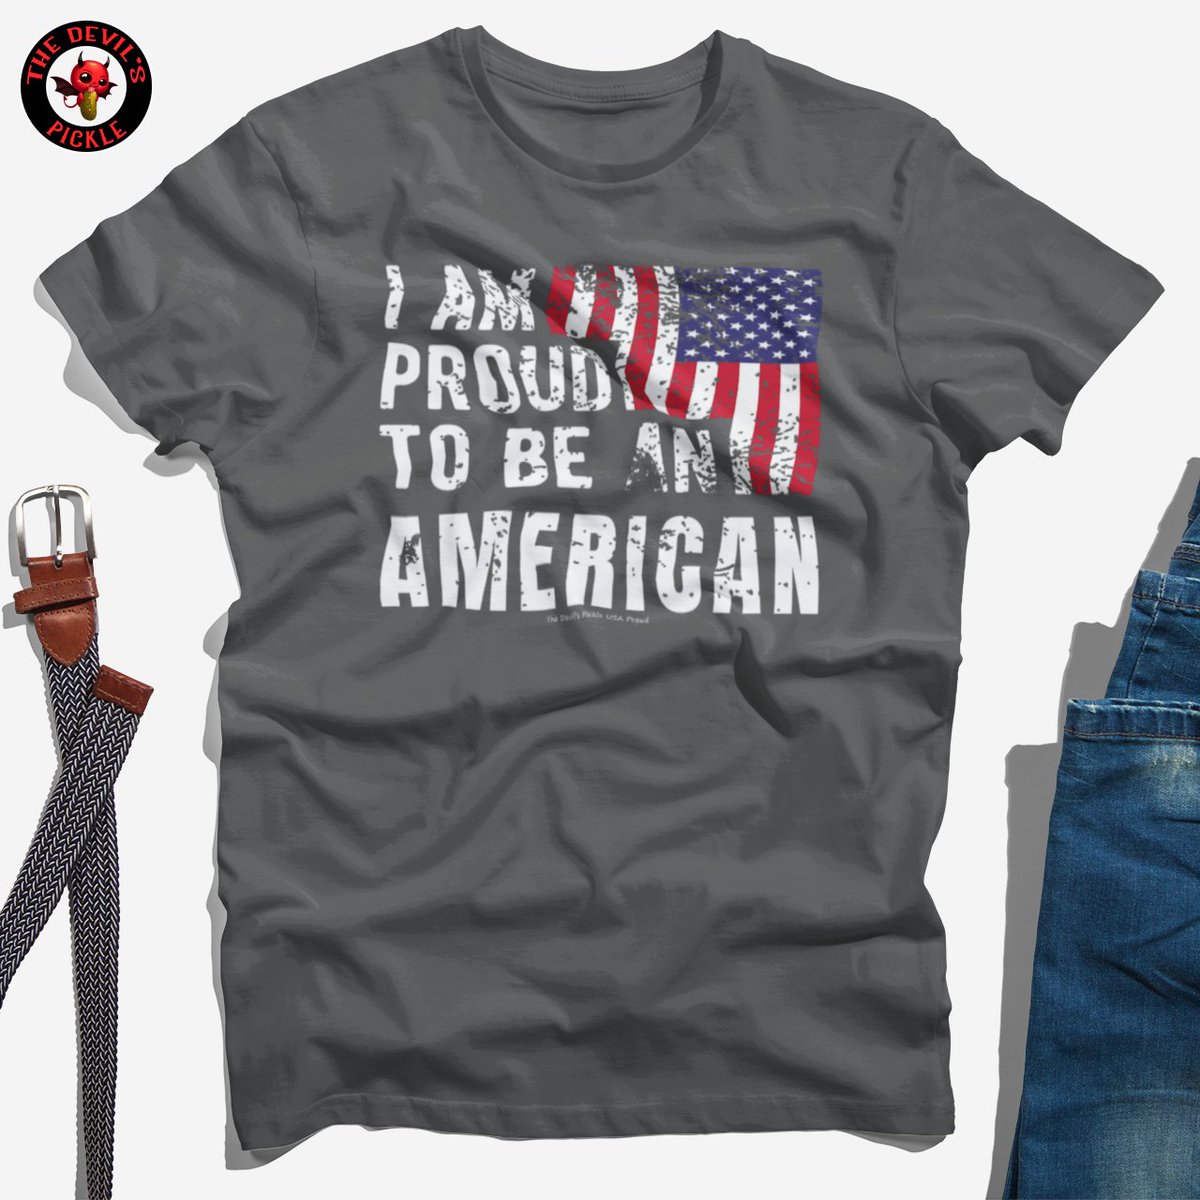 This shirt screams red, white, and badass! Proud American Tees, Hoodies and Sweatshirts Exclusively at The Devil's Pickle.

#ProudAmerican #freeshipping #USA #patriot #patriotichoodies #americanpride #Freedom #2ndamendment #proudtobeanamerican #hellyeahamerica #american